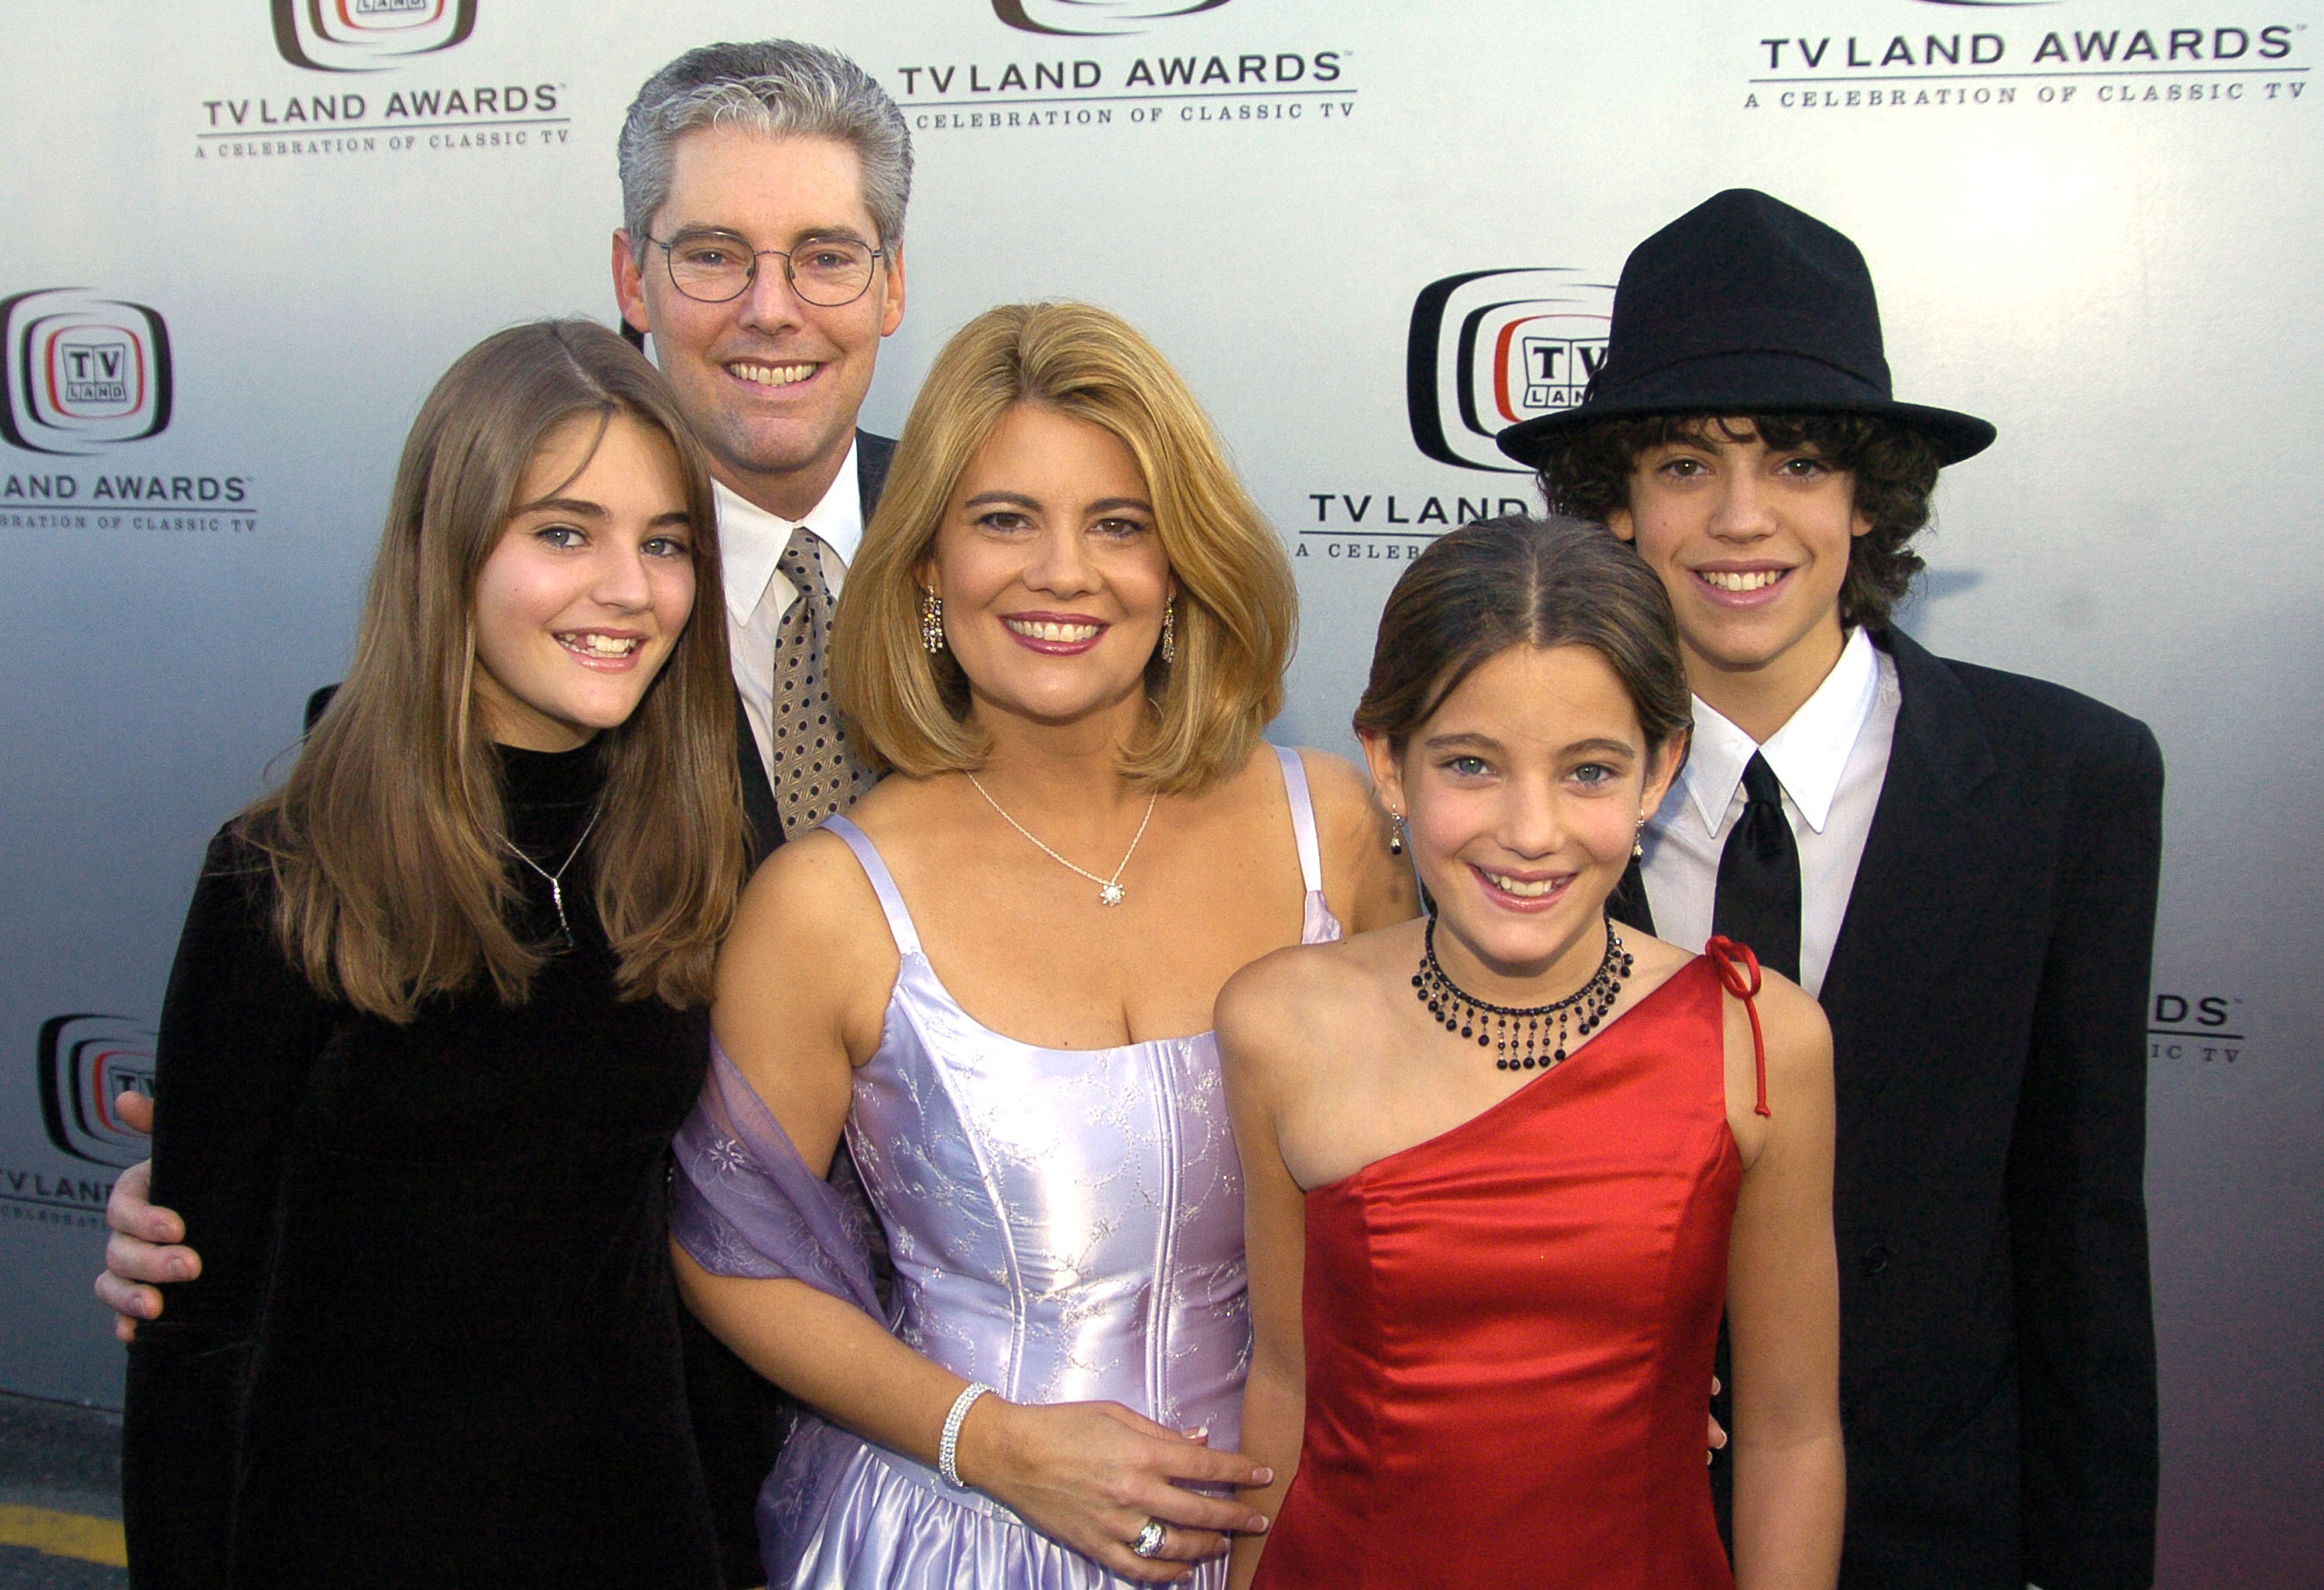 From (L-R) Haven Cauble, Steven Cauble, Lisa Whelchel, Clancy Cauble and Tucker Cauble at the 2004 TV Land Awards on March 7, 2004 in Hollywood, California. | Source: Getty Images